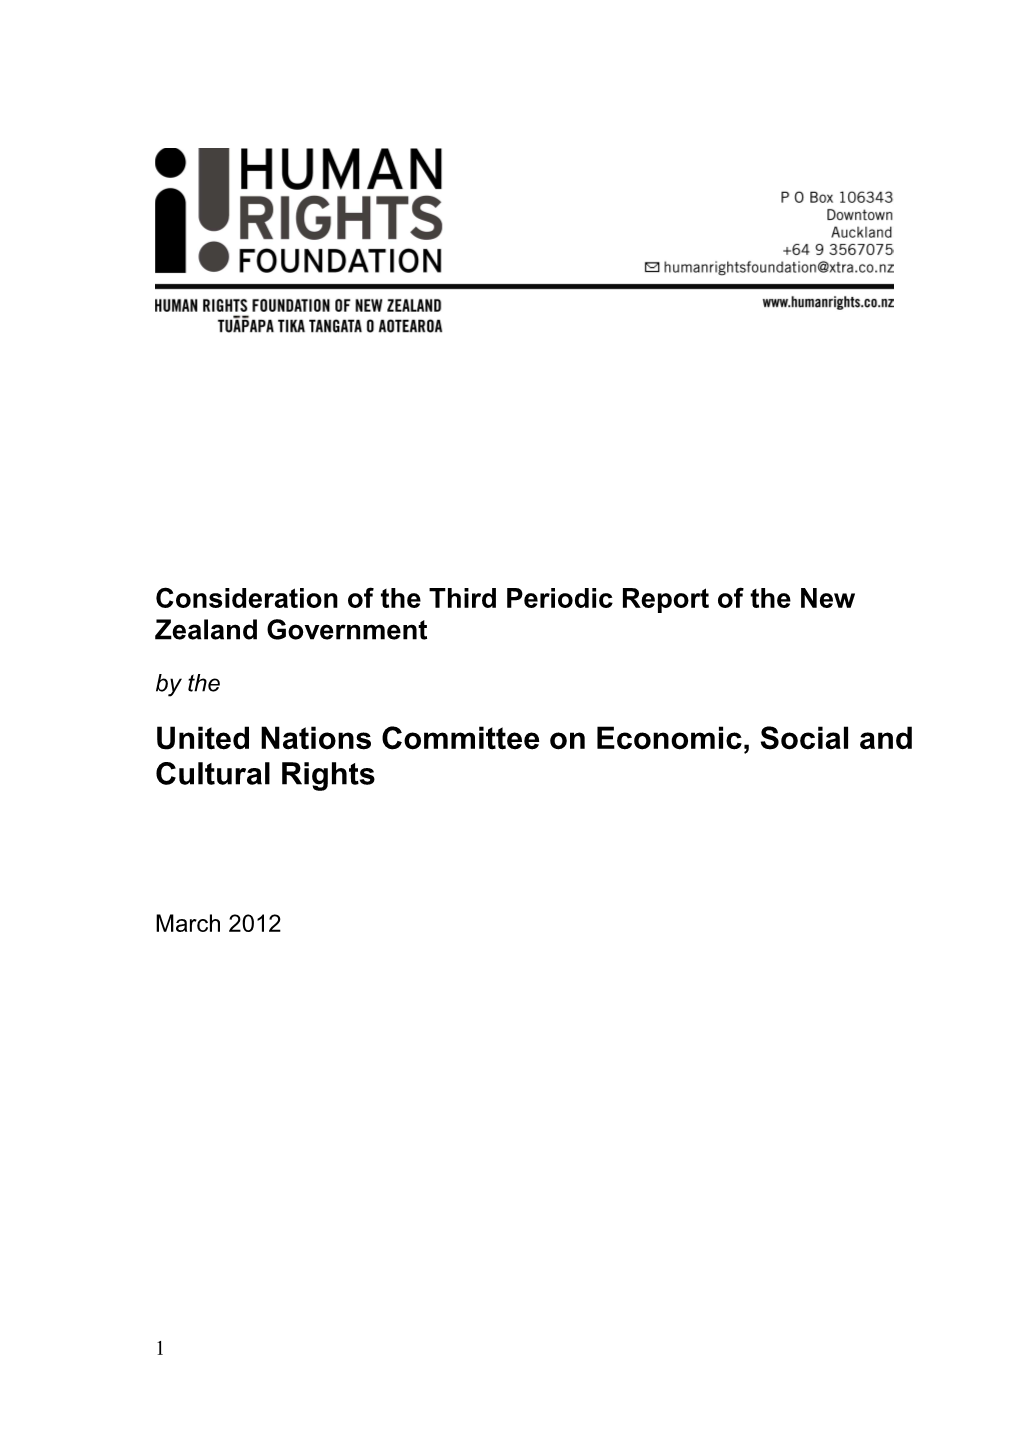 Consideration of the Third Periodic Report of the New Zealand Government